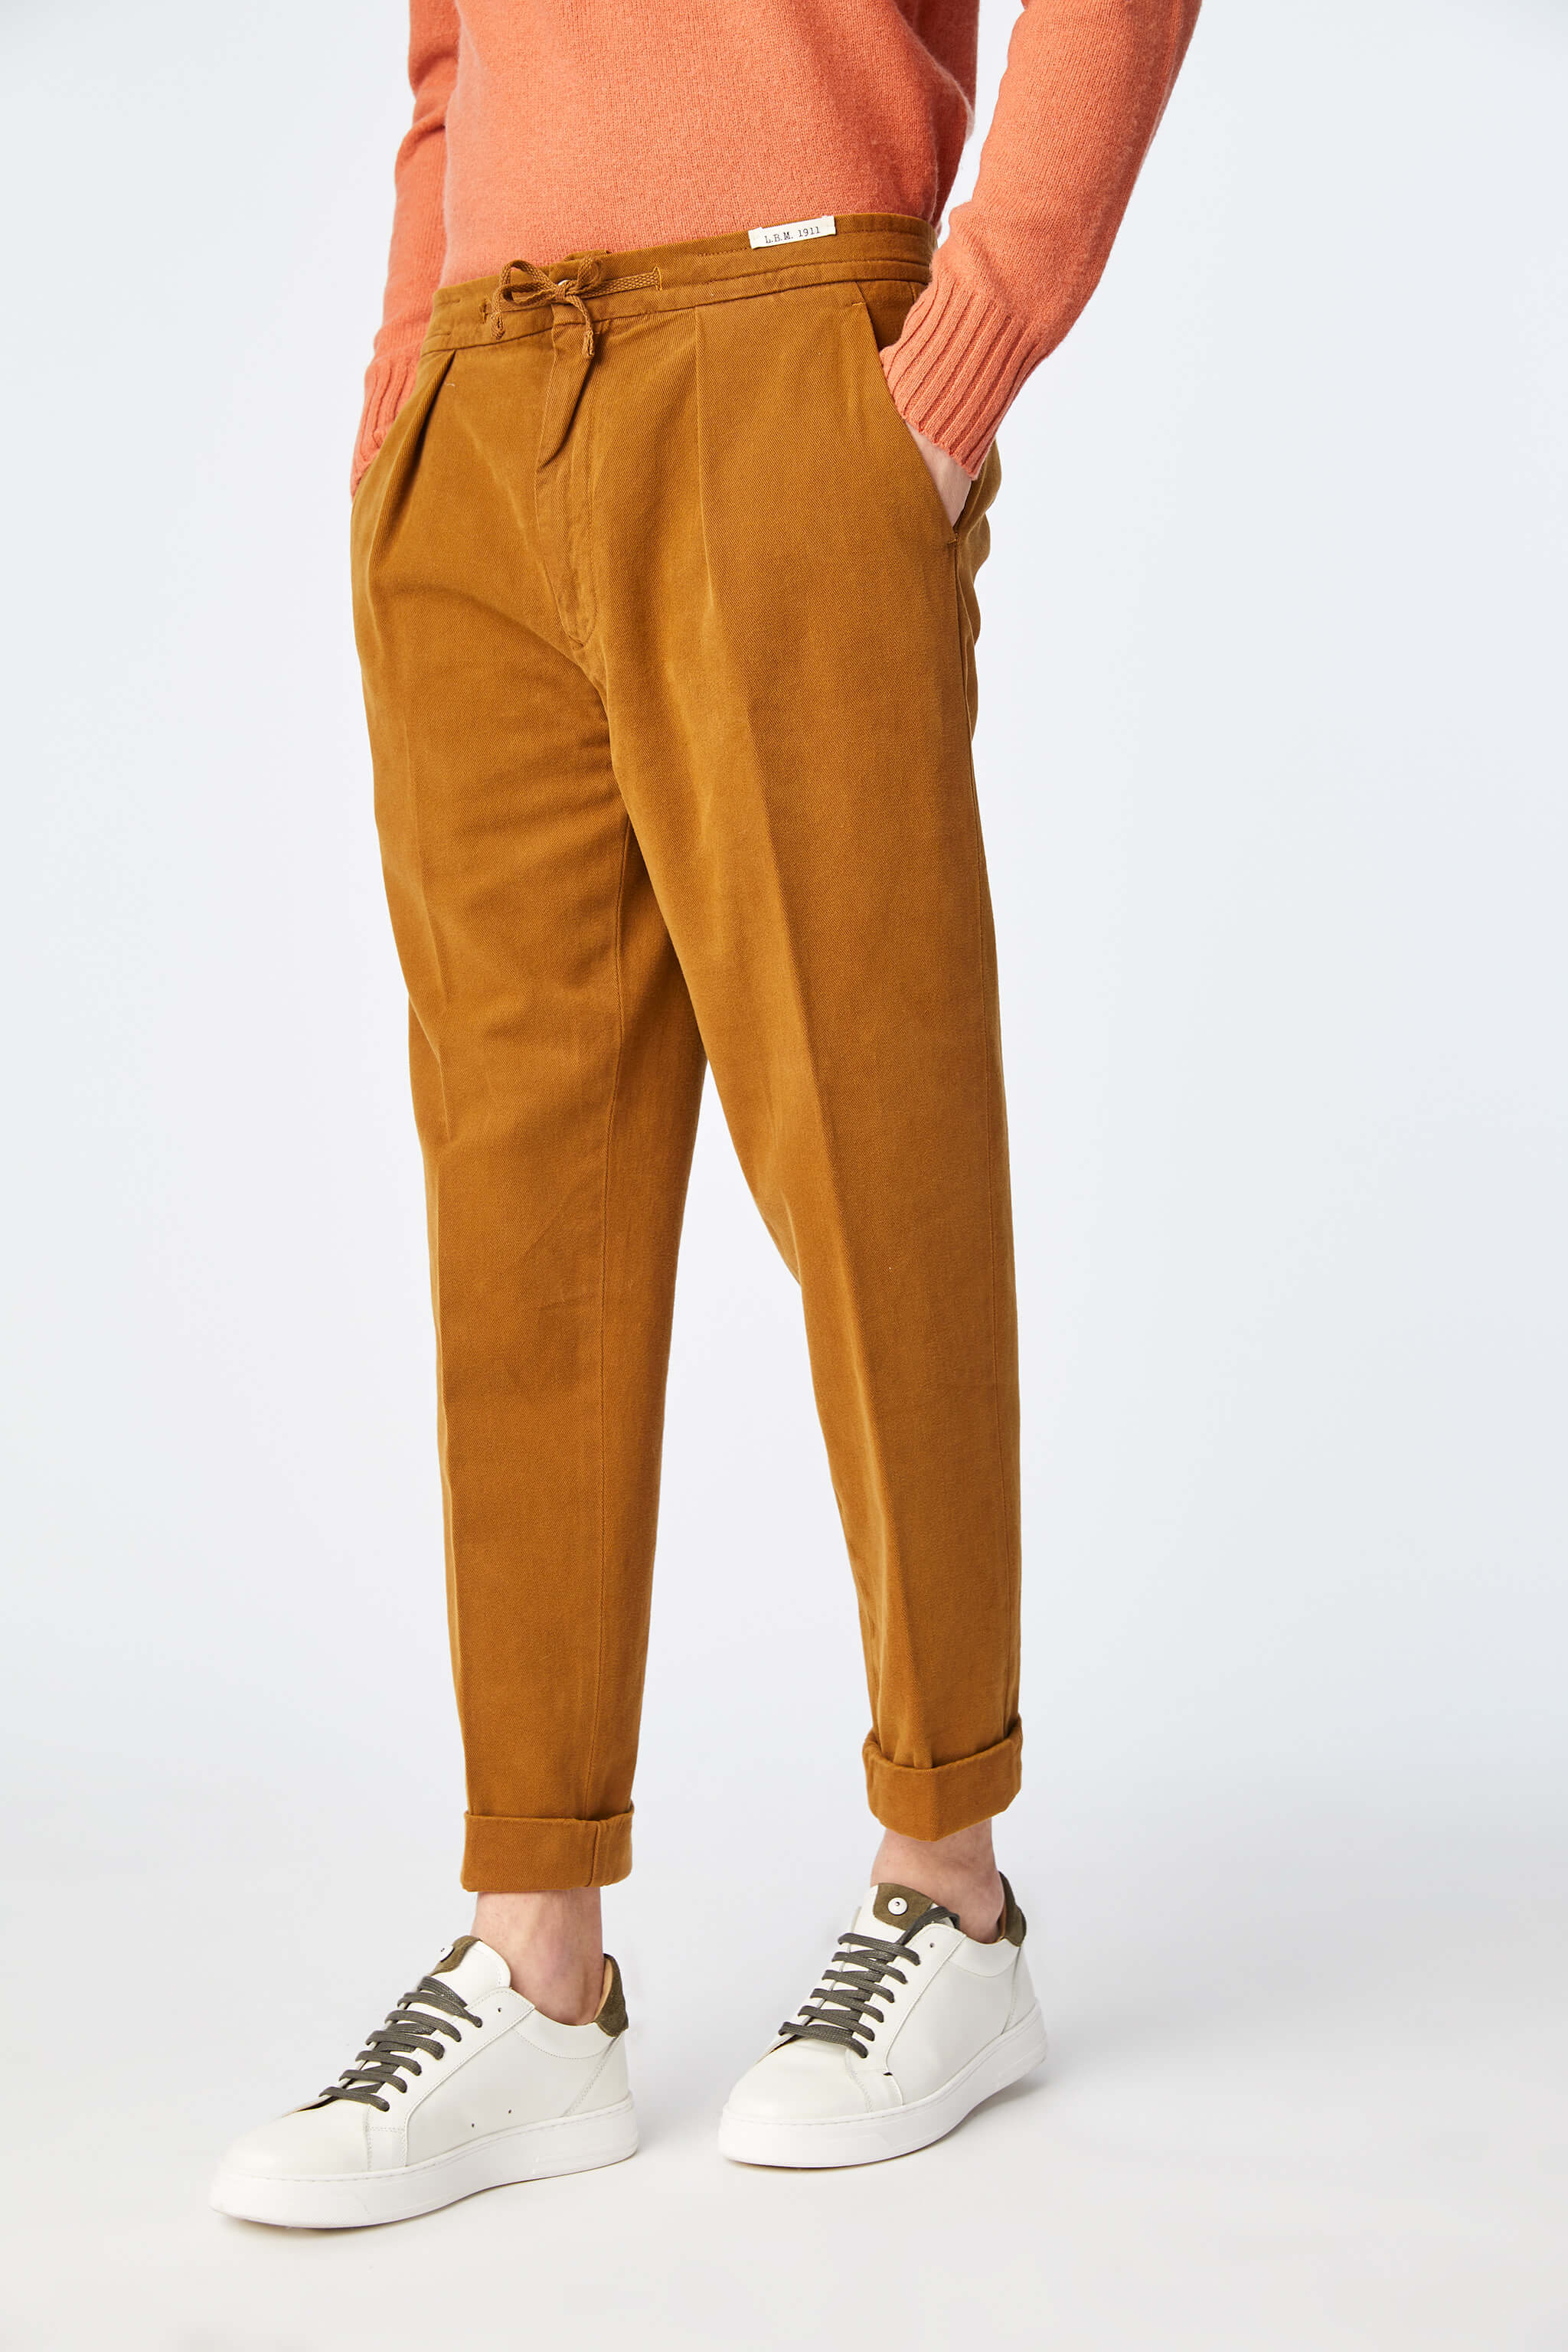 Garment-dyed LESTER pants in yellow ochre